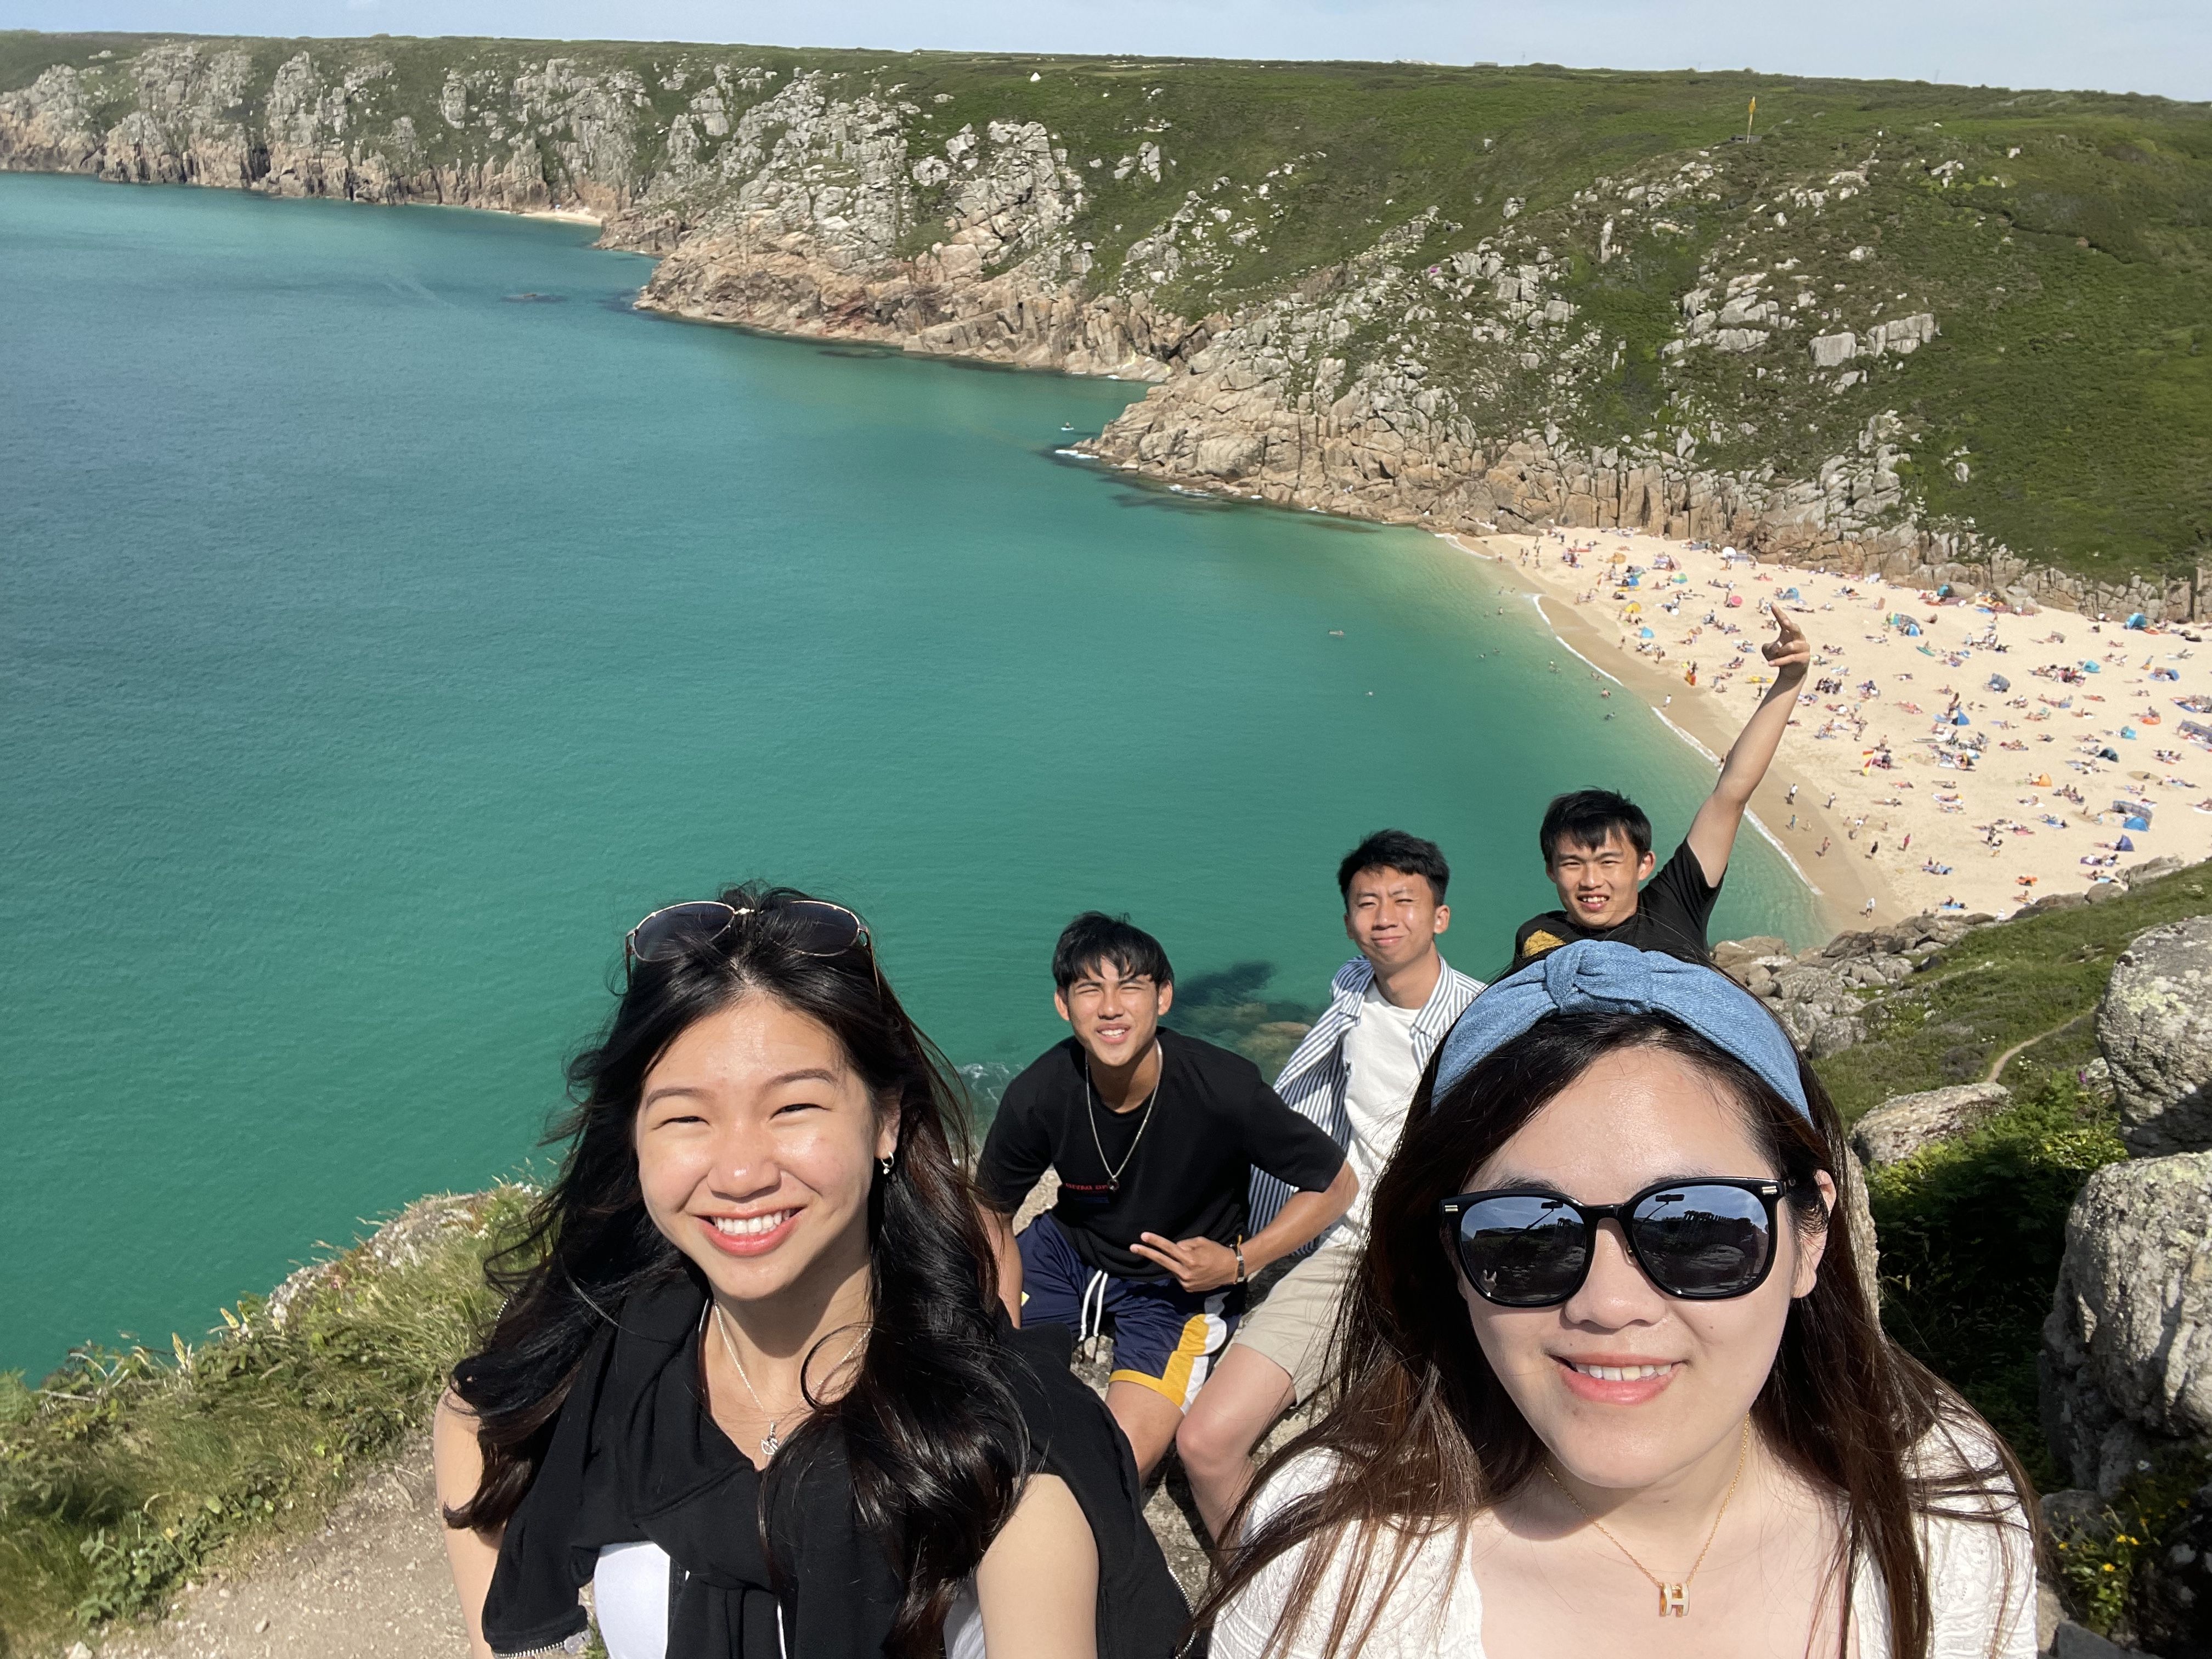 Sure Lyn and some of her friends smiling for the camera on a sunny day while visiting a sandy beach in Cornwall